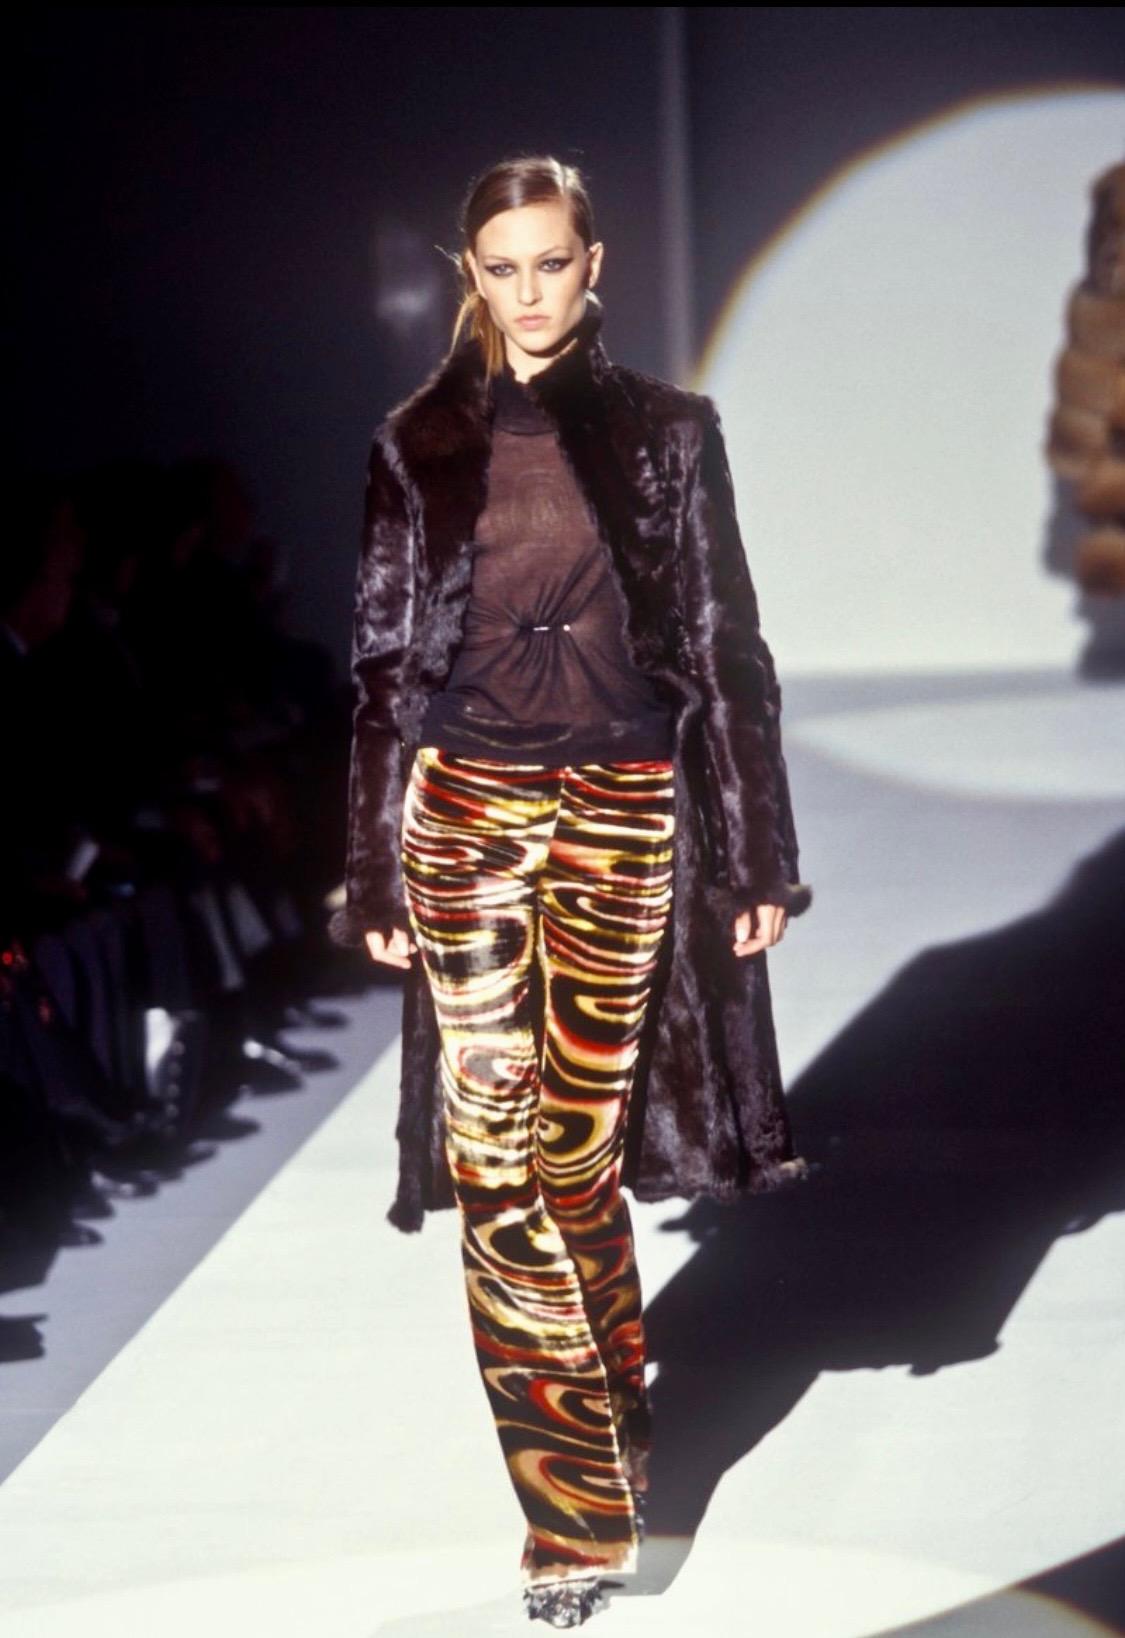 Presenting a double-sided Persian lamb and rabbit fur full-length coat. This iconic Tom Ford design was featured on the F/W 1999 runway presentation twice: on look 19 and look 24. According to Ford, this collection was meant to be cleaner than the